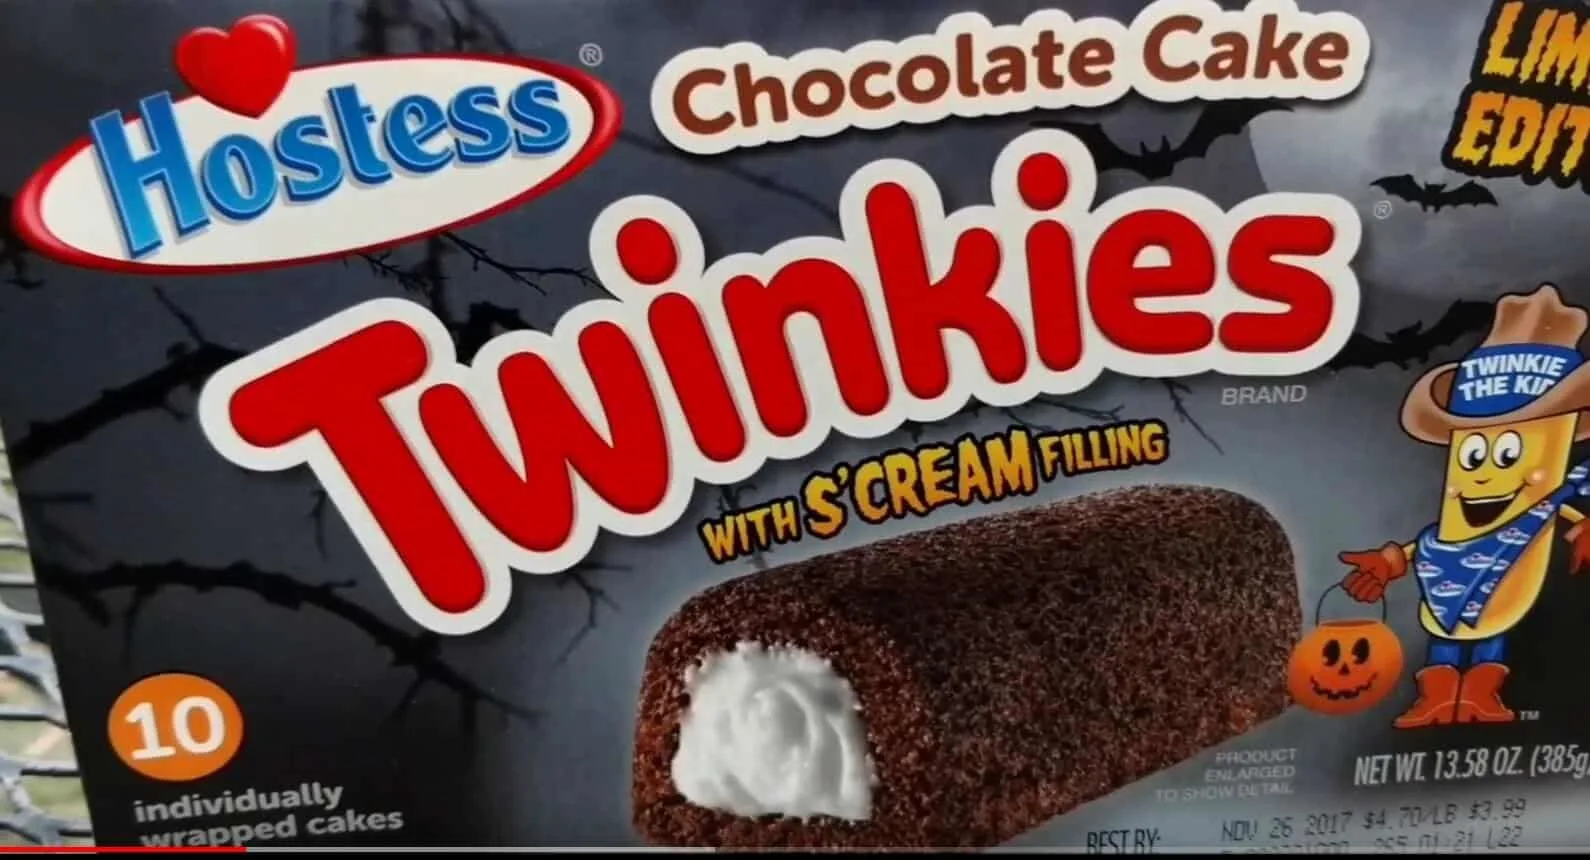 This is a image of Hostess Chocolate Cake Twinkies in a box.